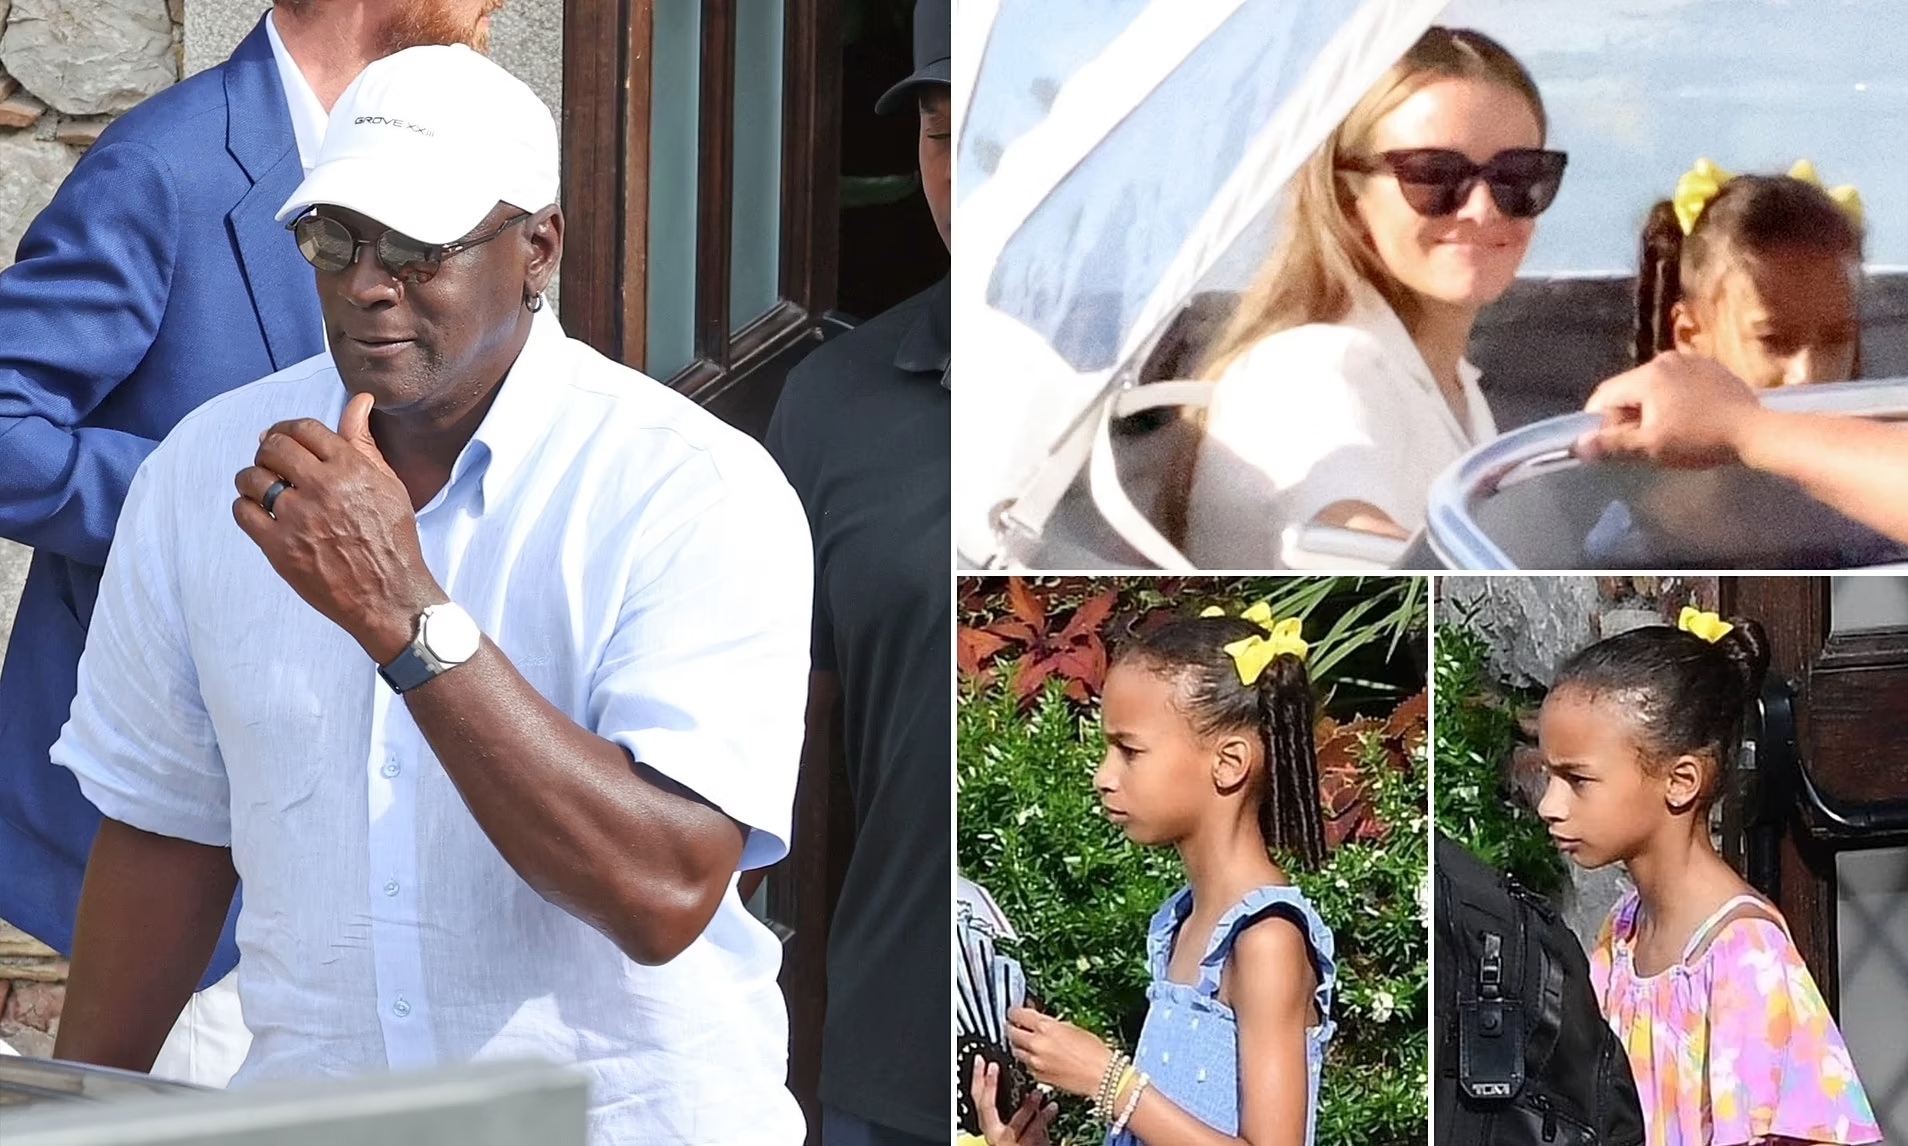 A collage picture of Michael Jordan, his wife Yvette Prieto, and their twin daughters Victoria Jordan and Ysabel Jordan from their rare outing